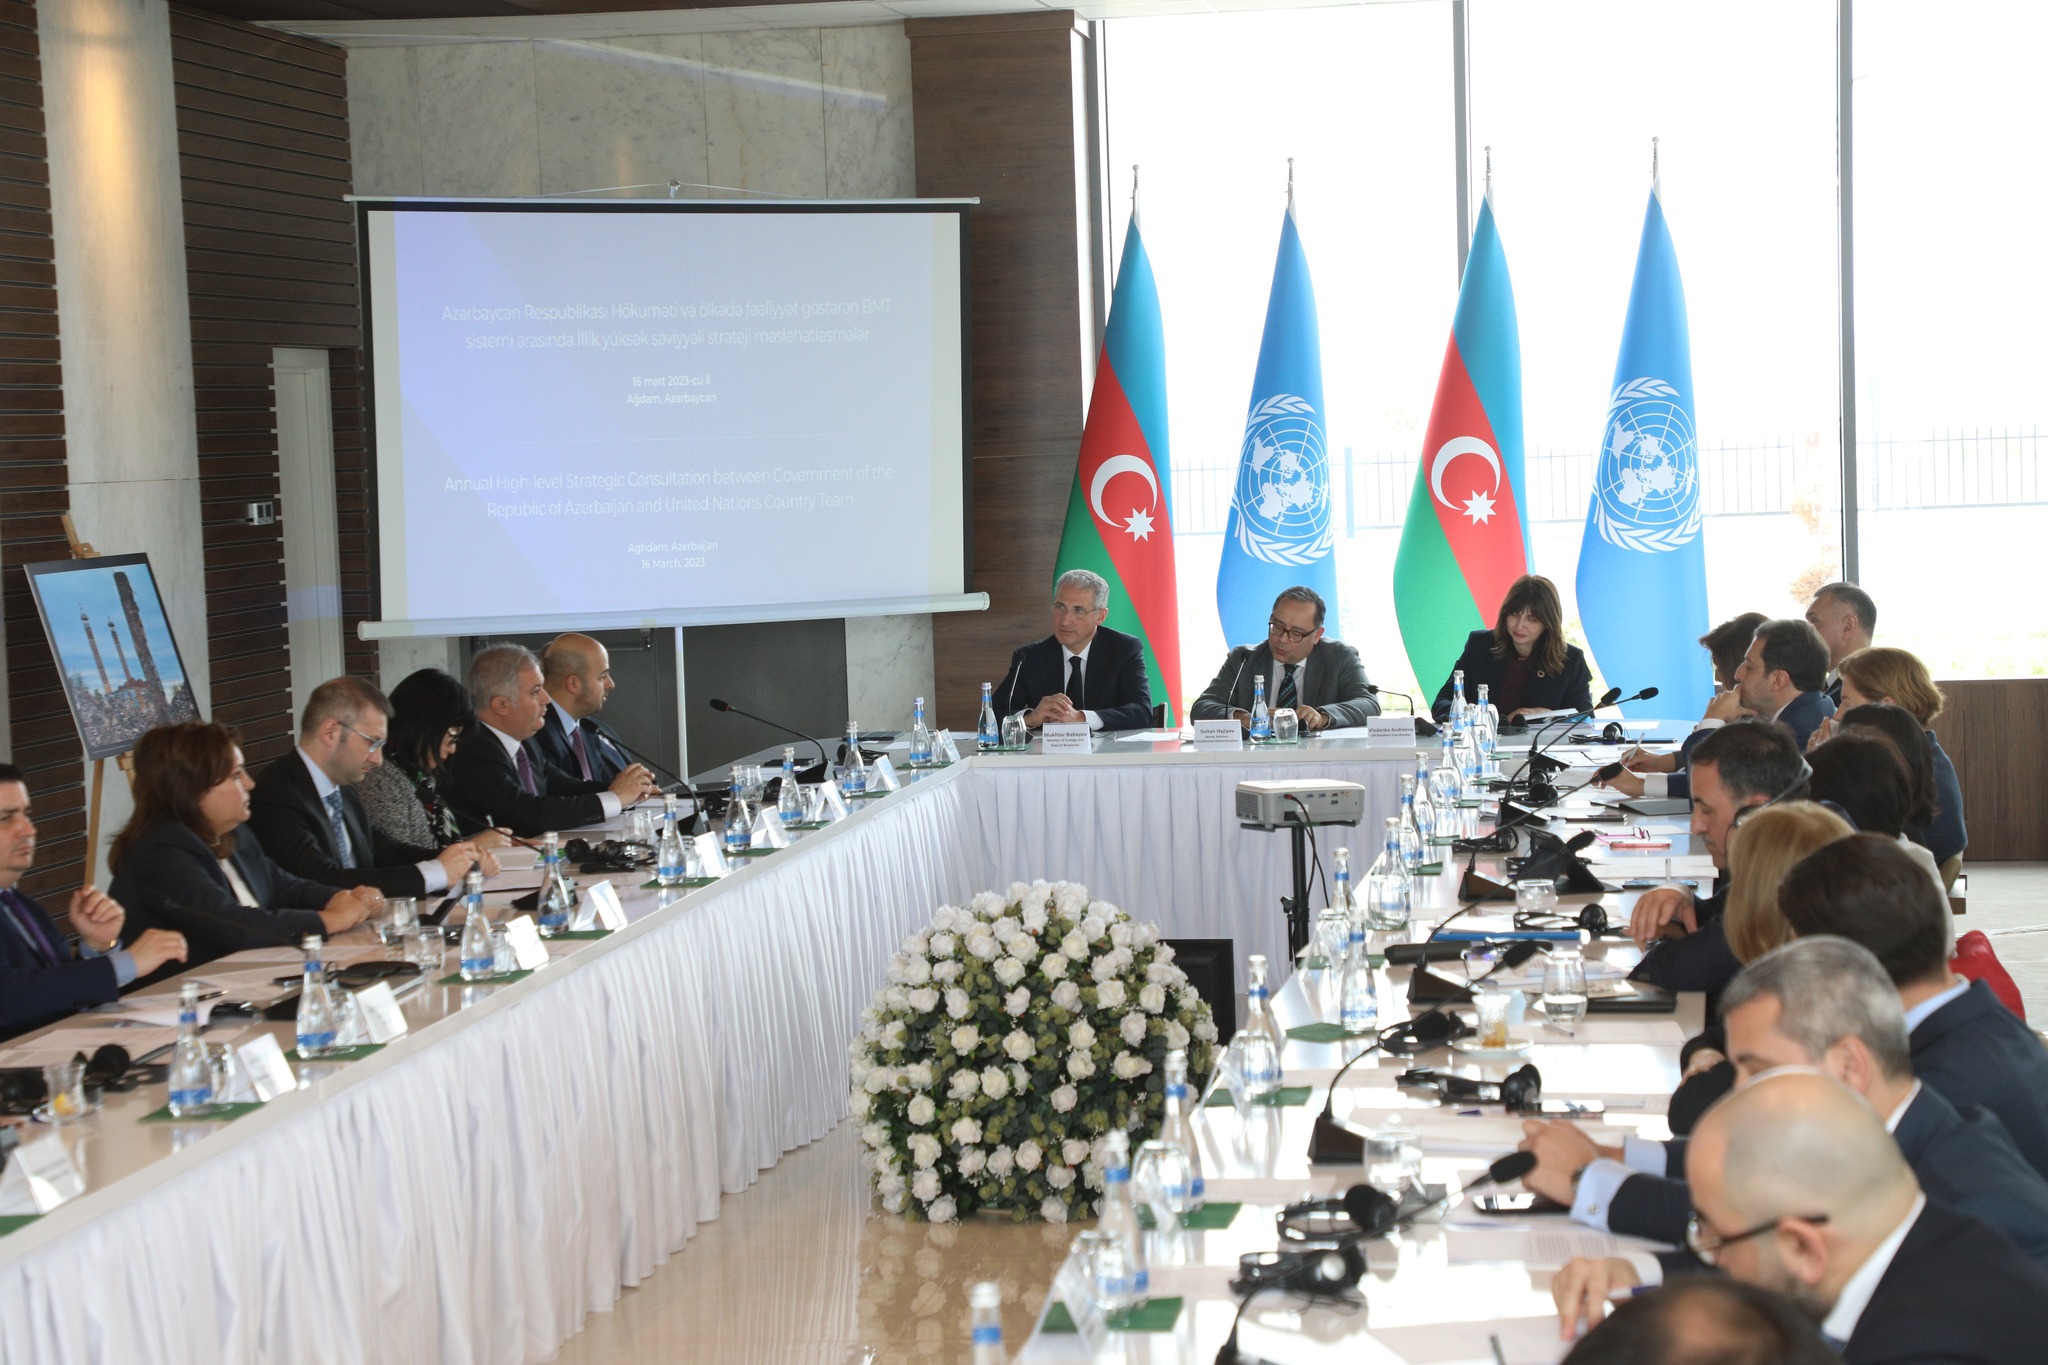 A meeting on cooperation between Azerbaijan and the UN was held in Aghdam